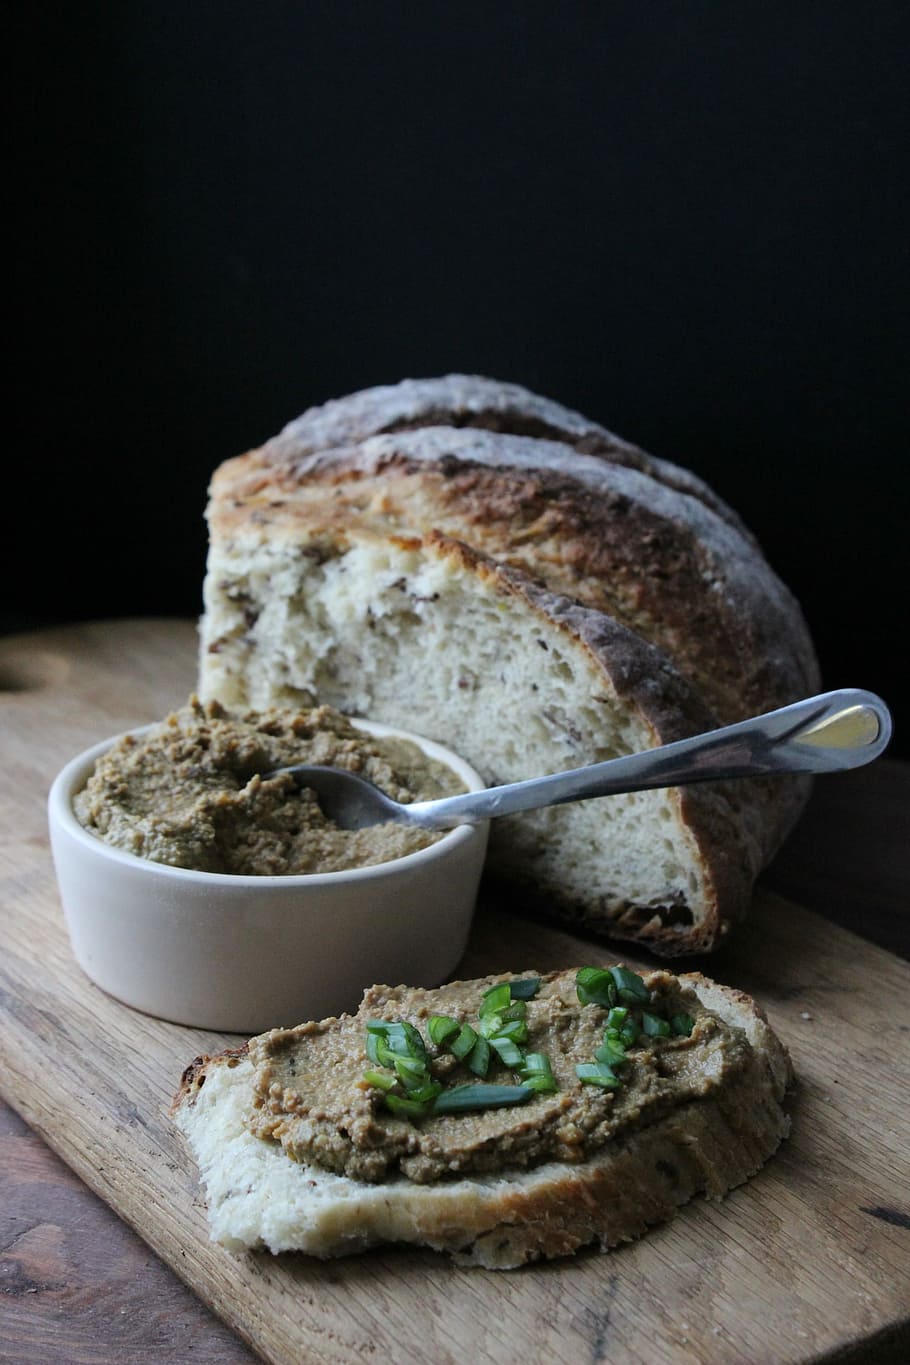 Bread and paté, breakfast, dinner, lunch, pate, restaurant, spoon